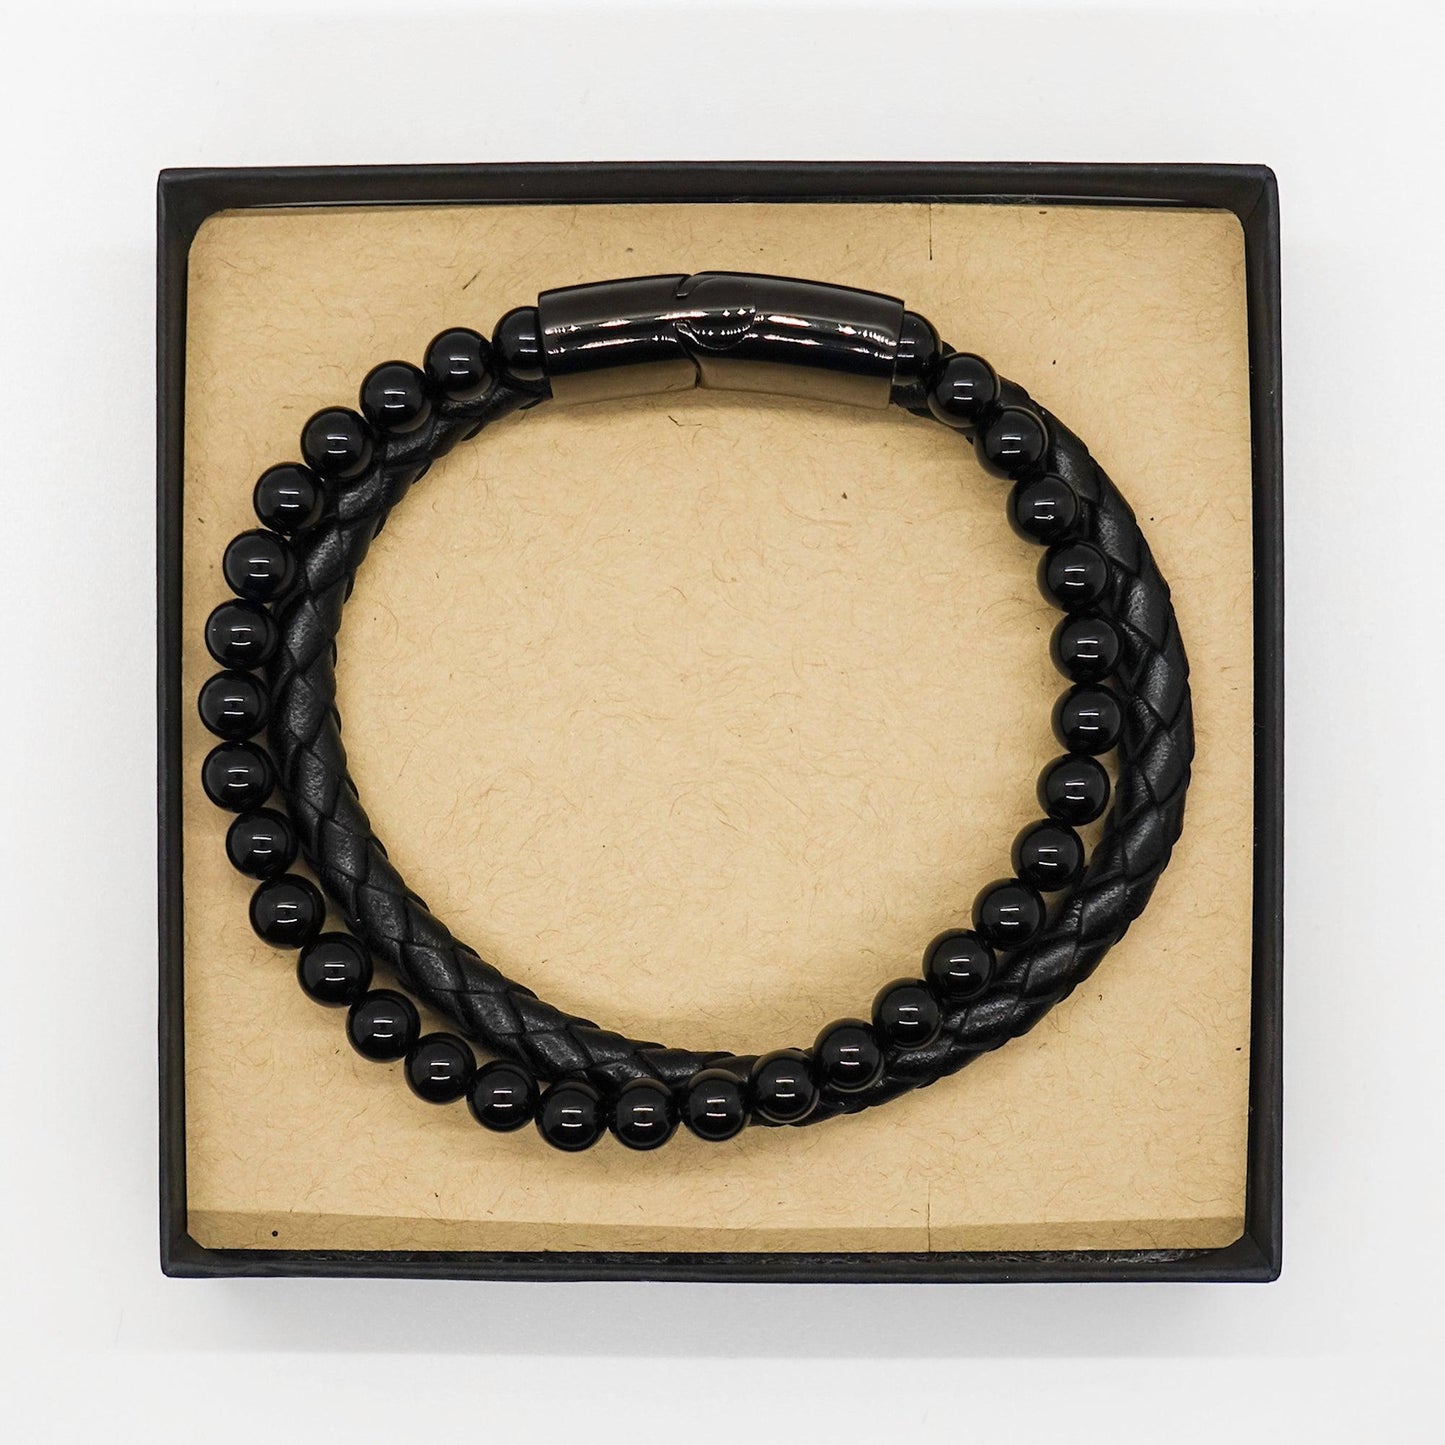 Welder Black Braided Leather Stone Bracelet - Thanks for being who you are - Birthday Christmas Jewelry Gifts Coworkers Colleague Boss - Mallard Moon Gift Shop